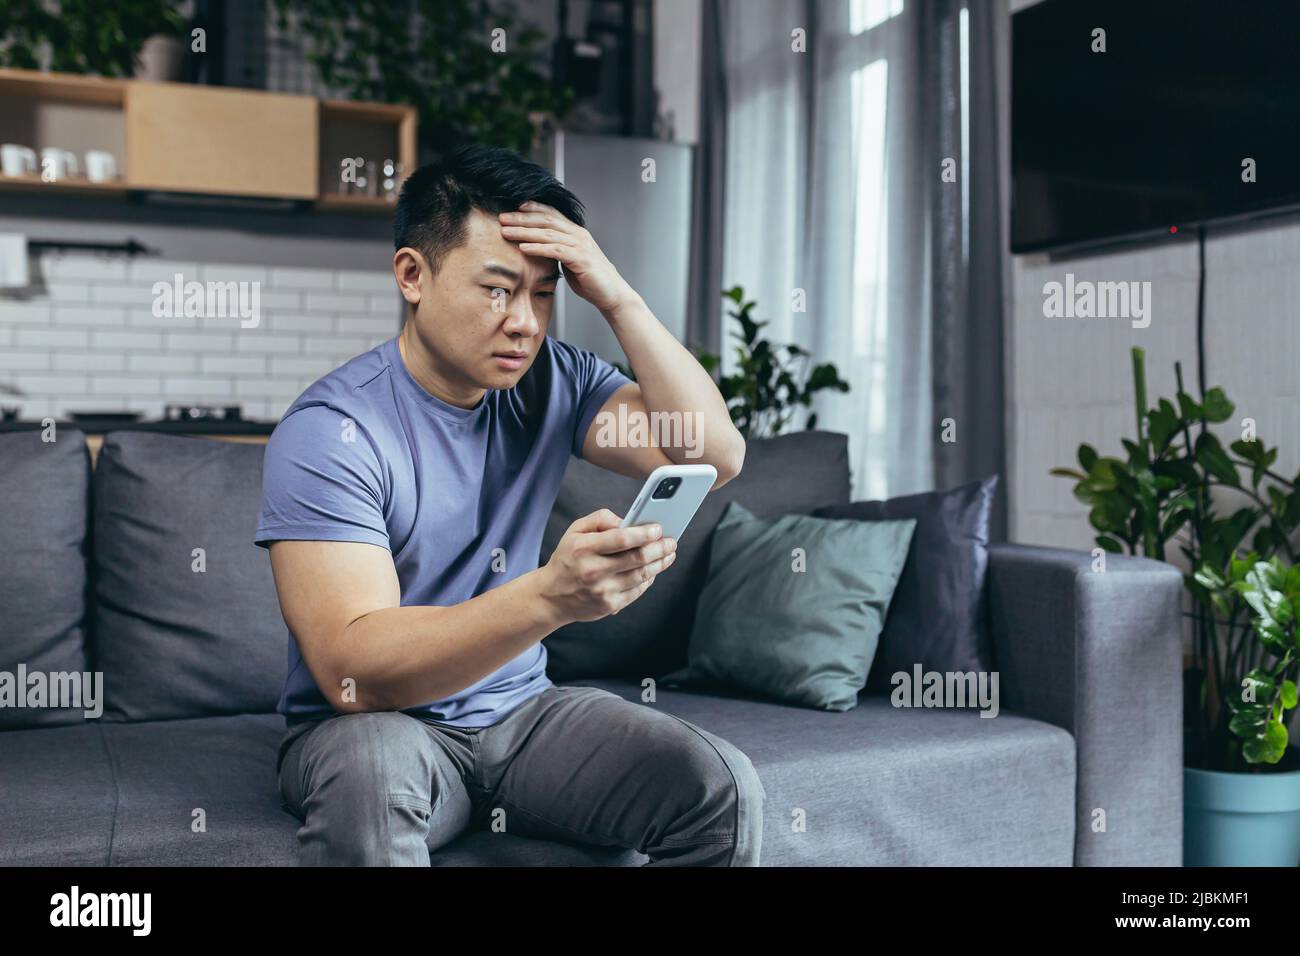 Concerned man reading news online looking at phone screen, Asian sitting on sofa at home, serious and sad Stock Photo